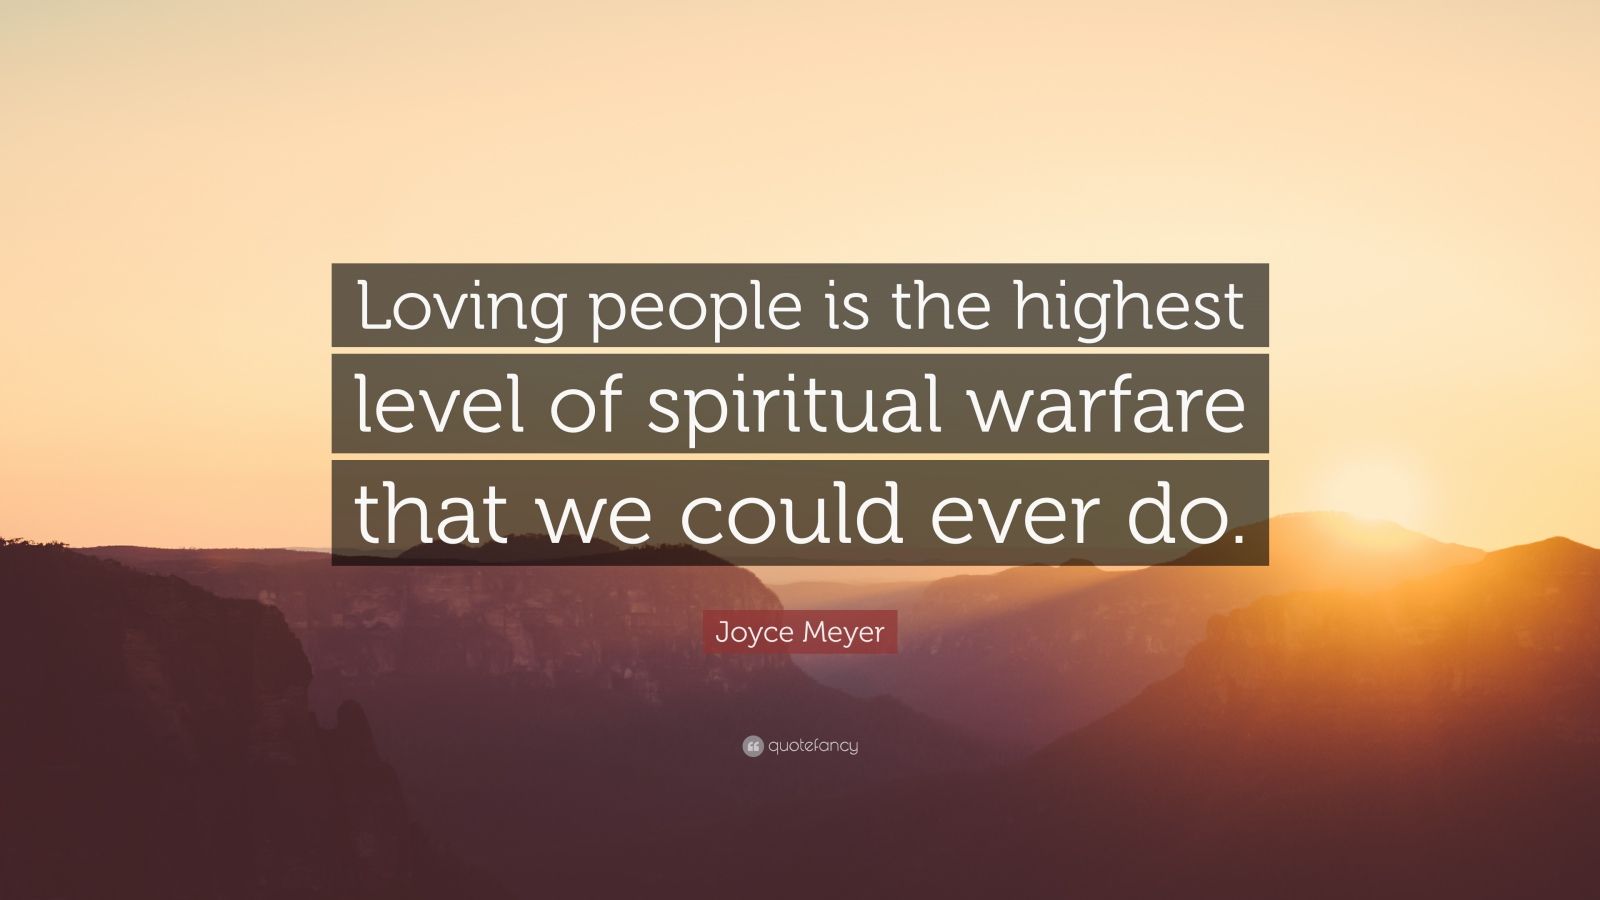 Joyce Meyer Quote: “Loving people is the highest level of spiritual